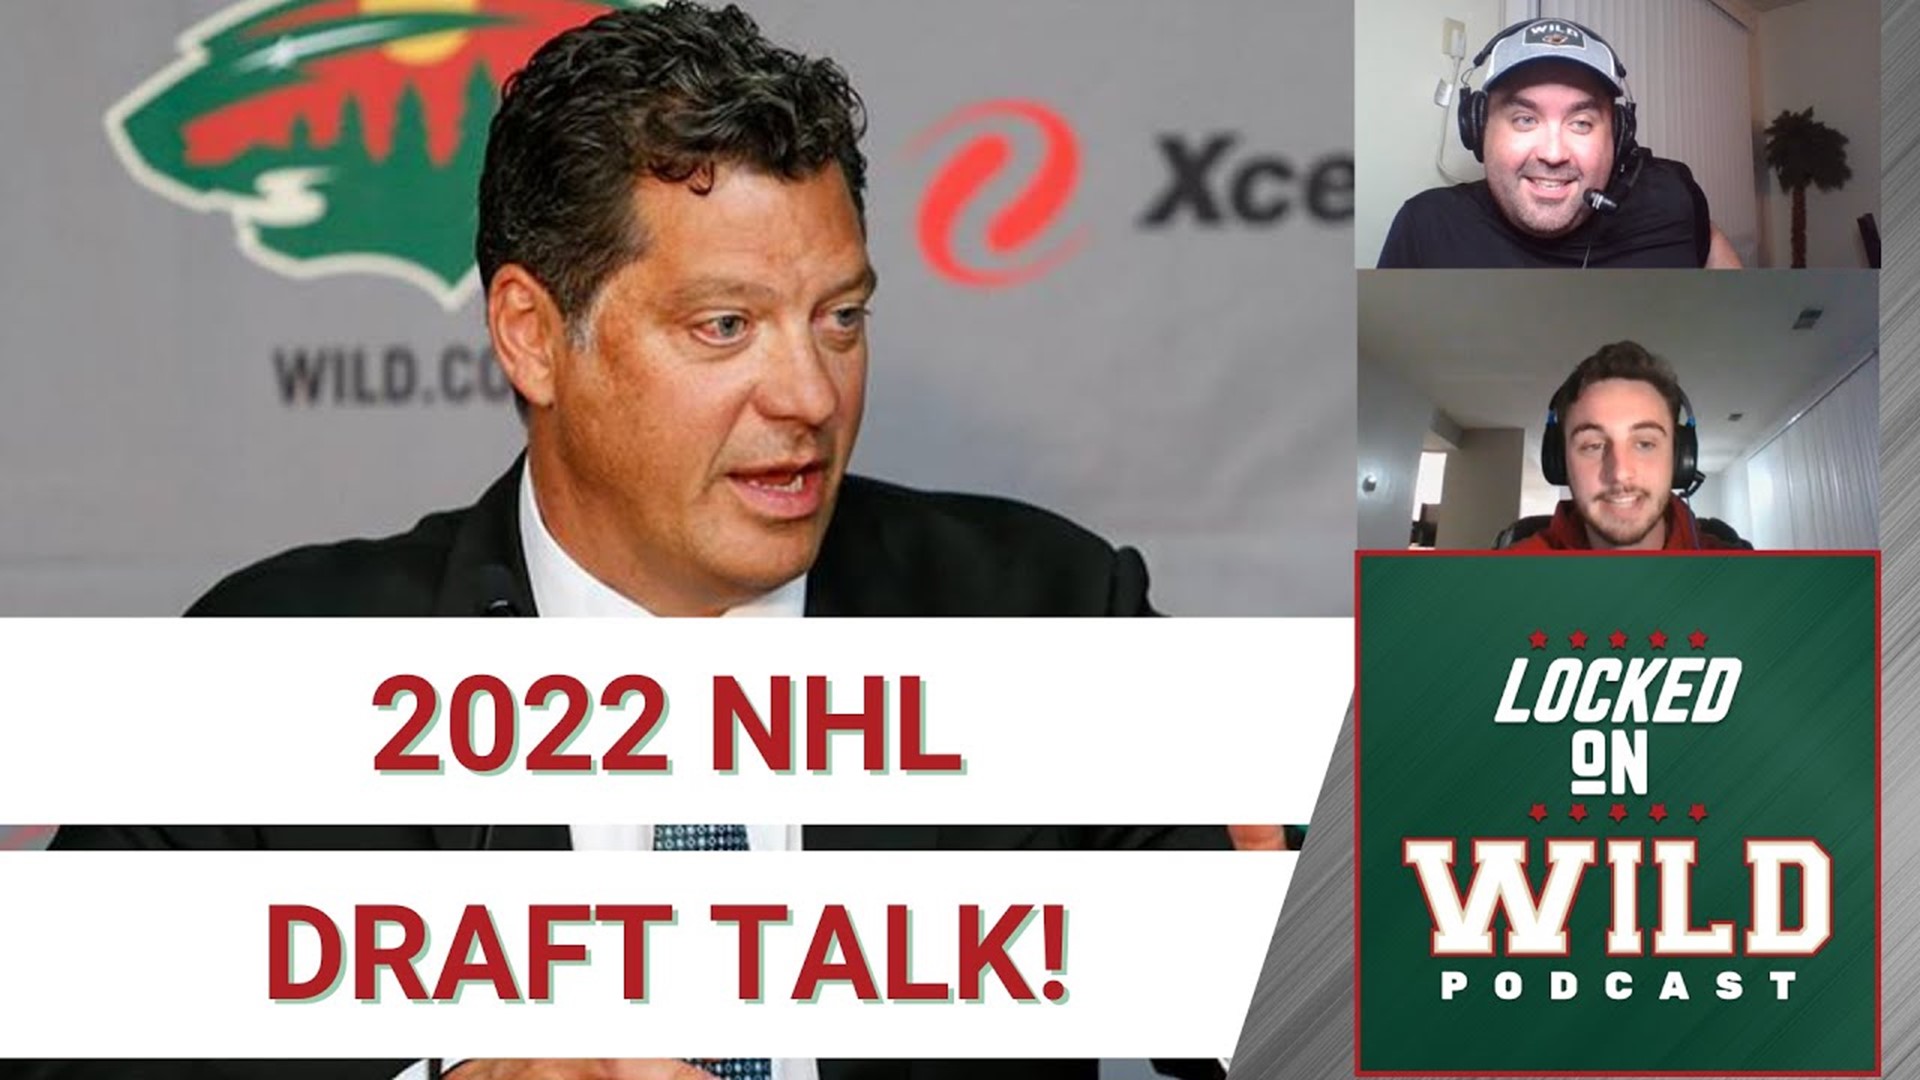 Resuming 2022 NHL Draft Discussion! Are there Any Late Round Names the Minnesota Wild should Target?